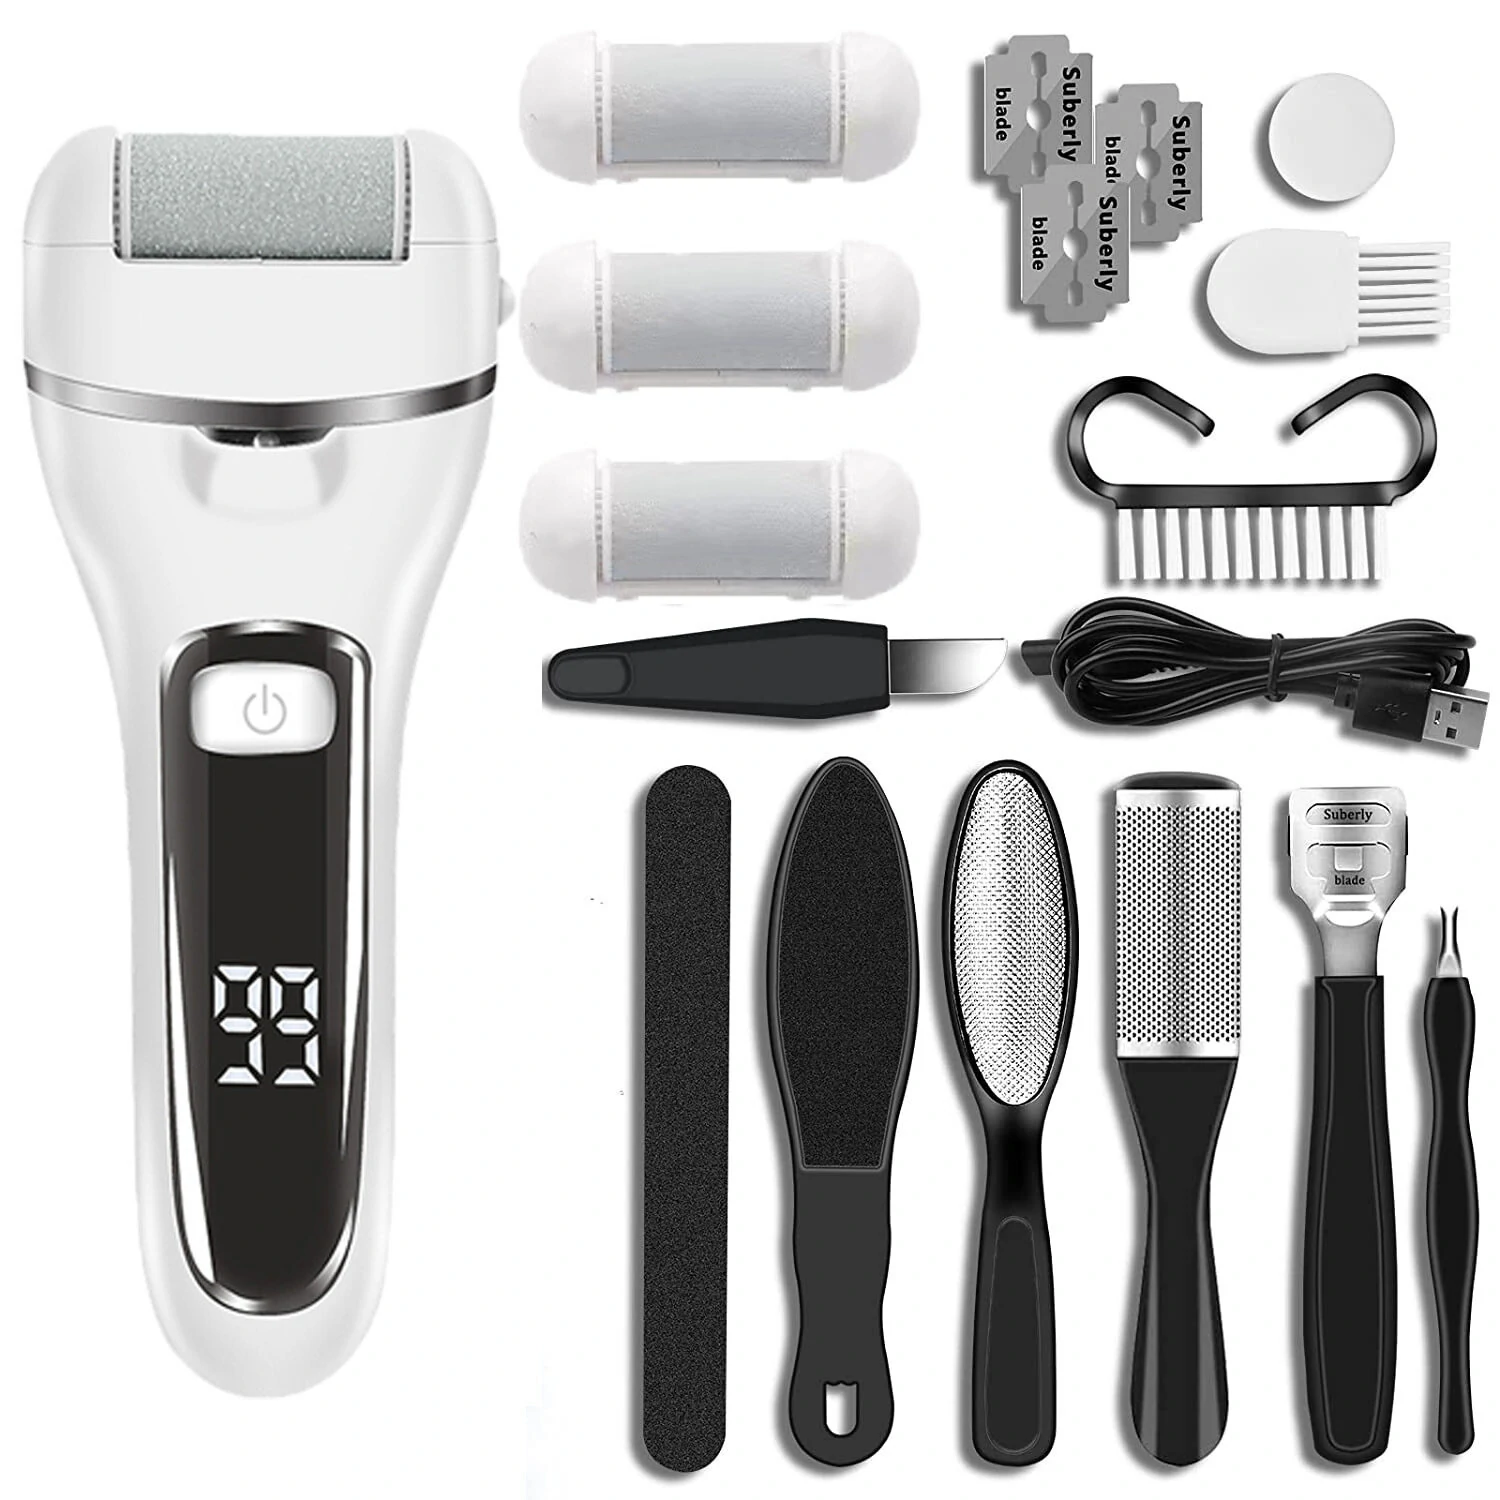 White Foot Callus Remover Electric Callus Remover Foot Grinder 10 in1 Pedicure Kit for Feet